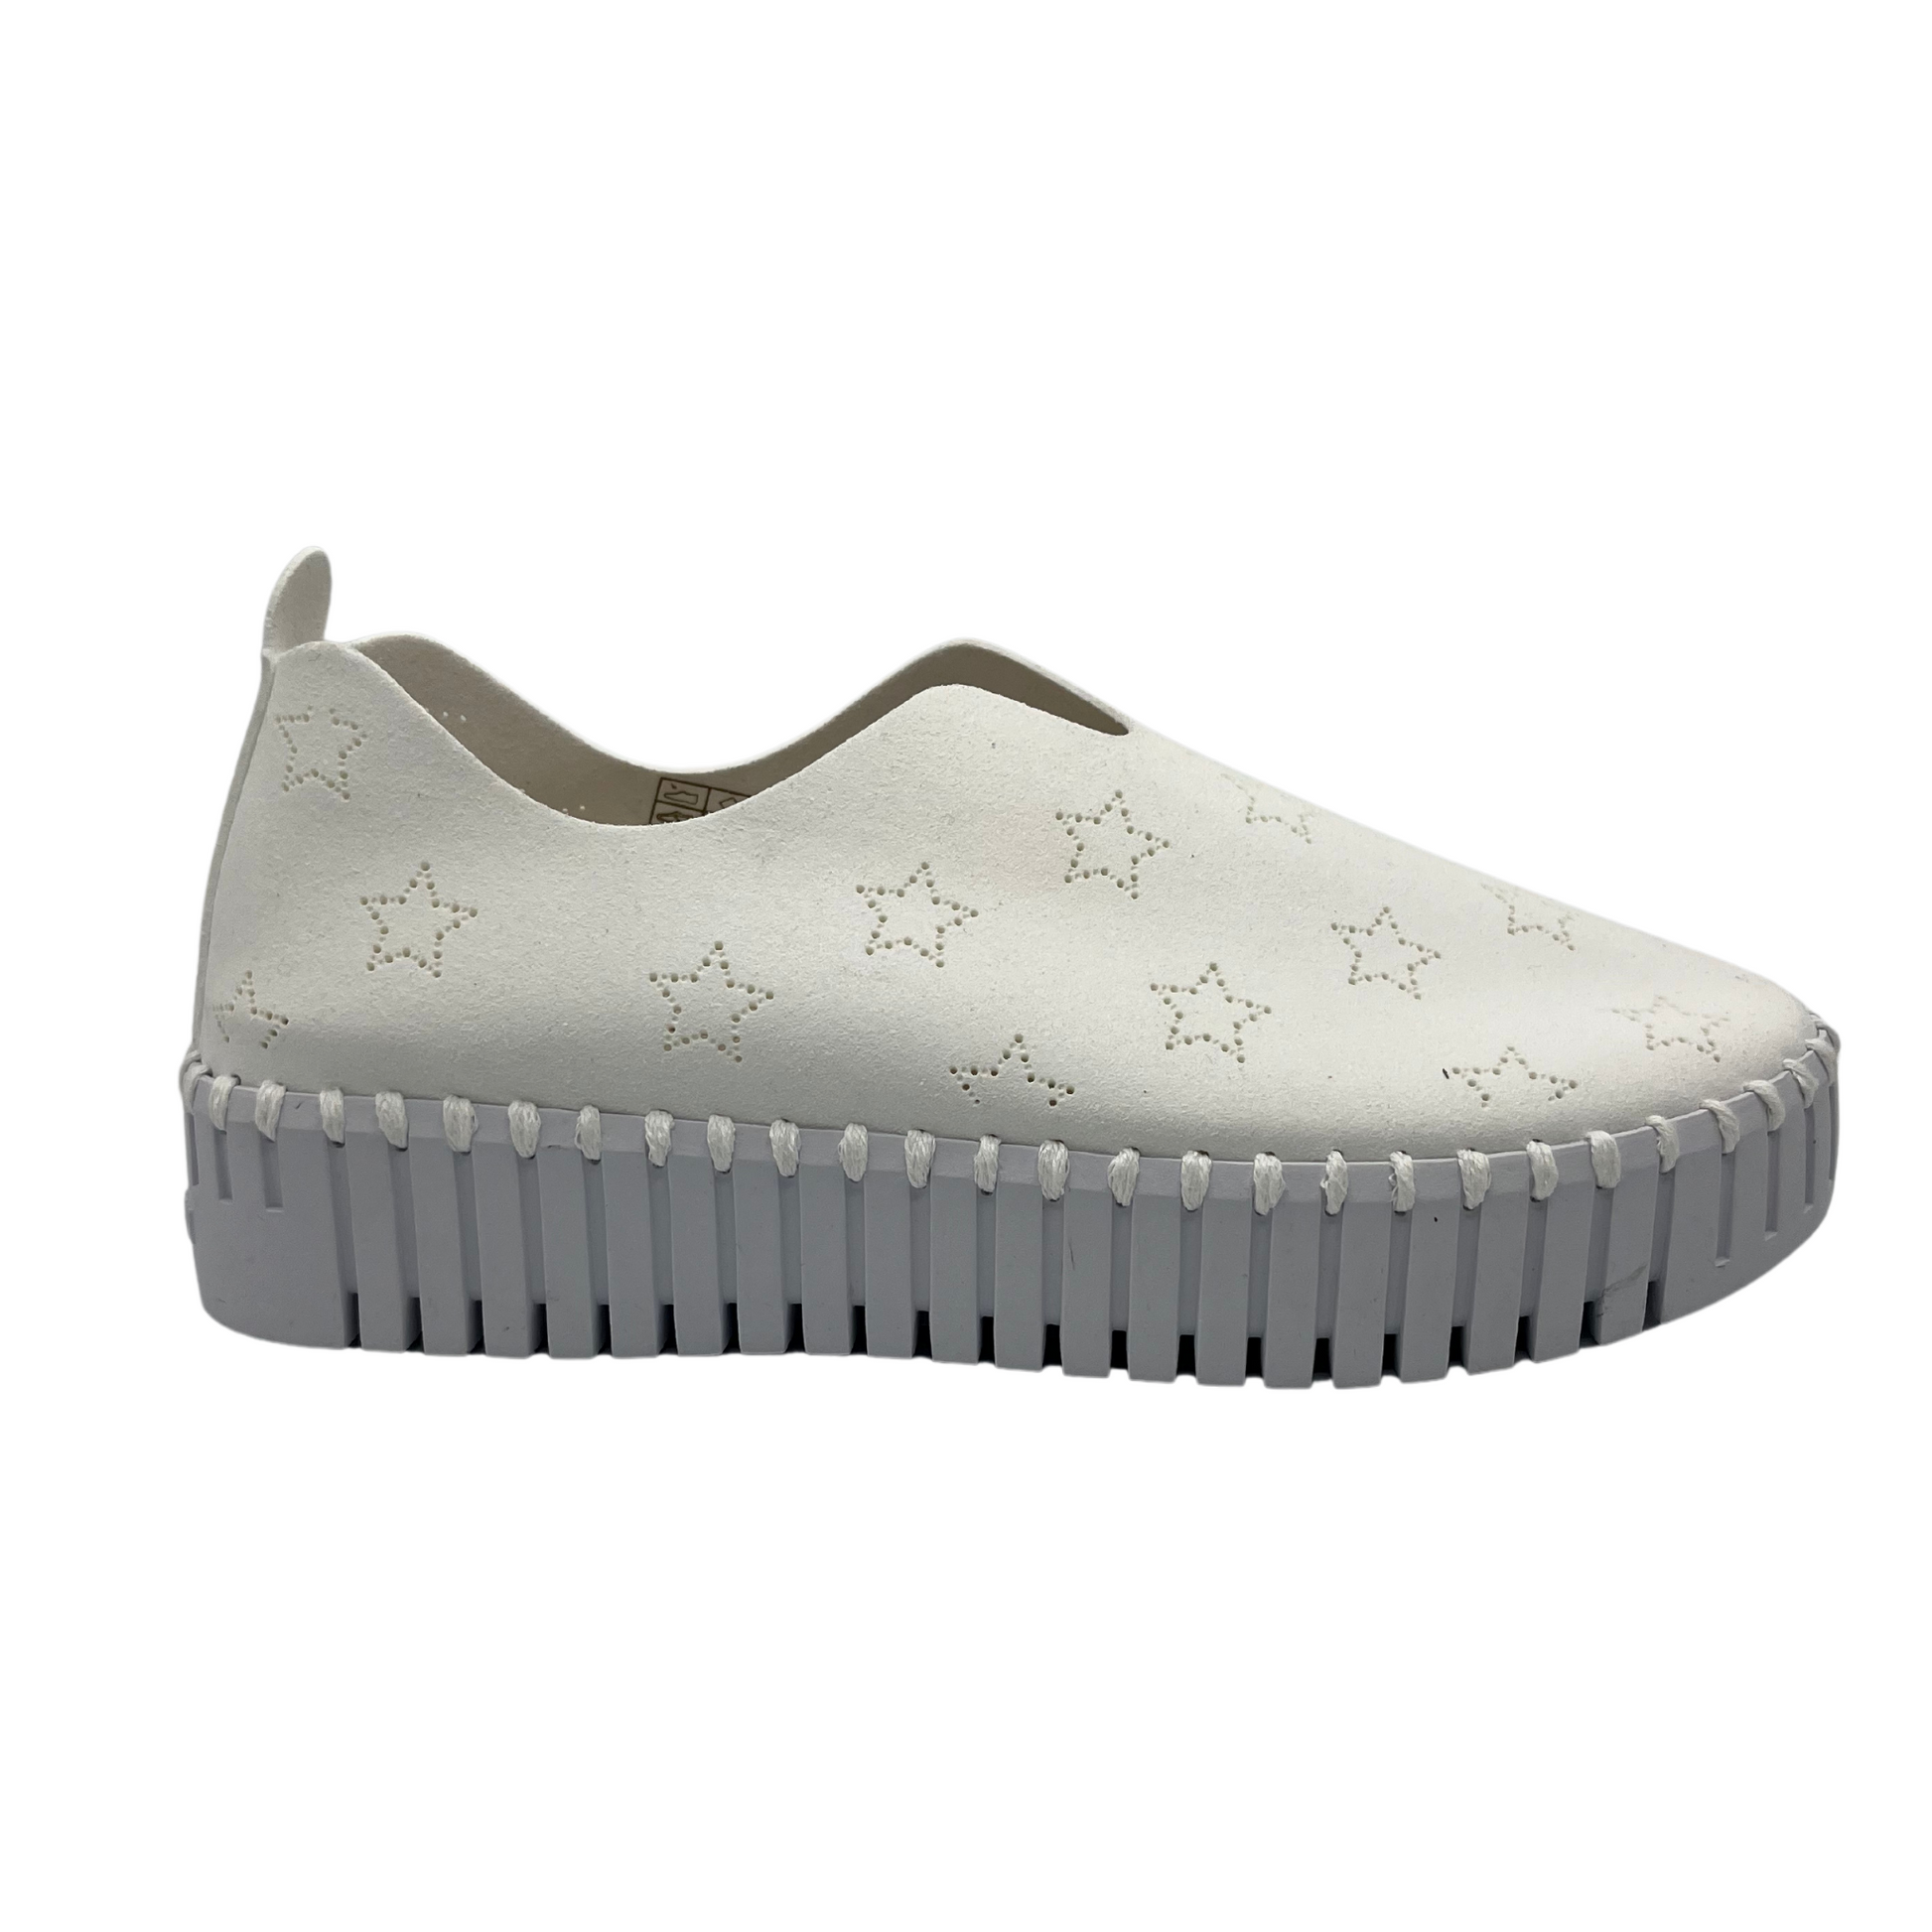 Right facing view of white slip on sneakers with small star cutouts on upper. White rubber platform sole.